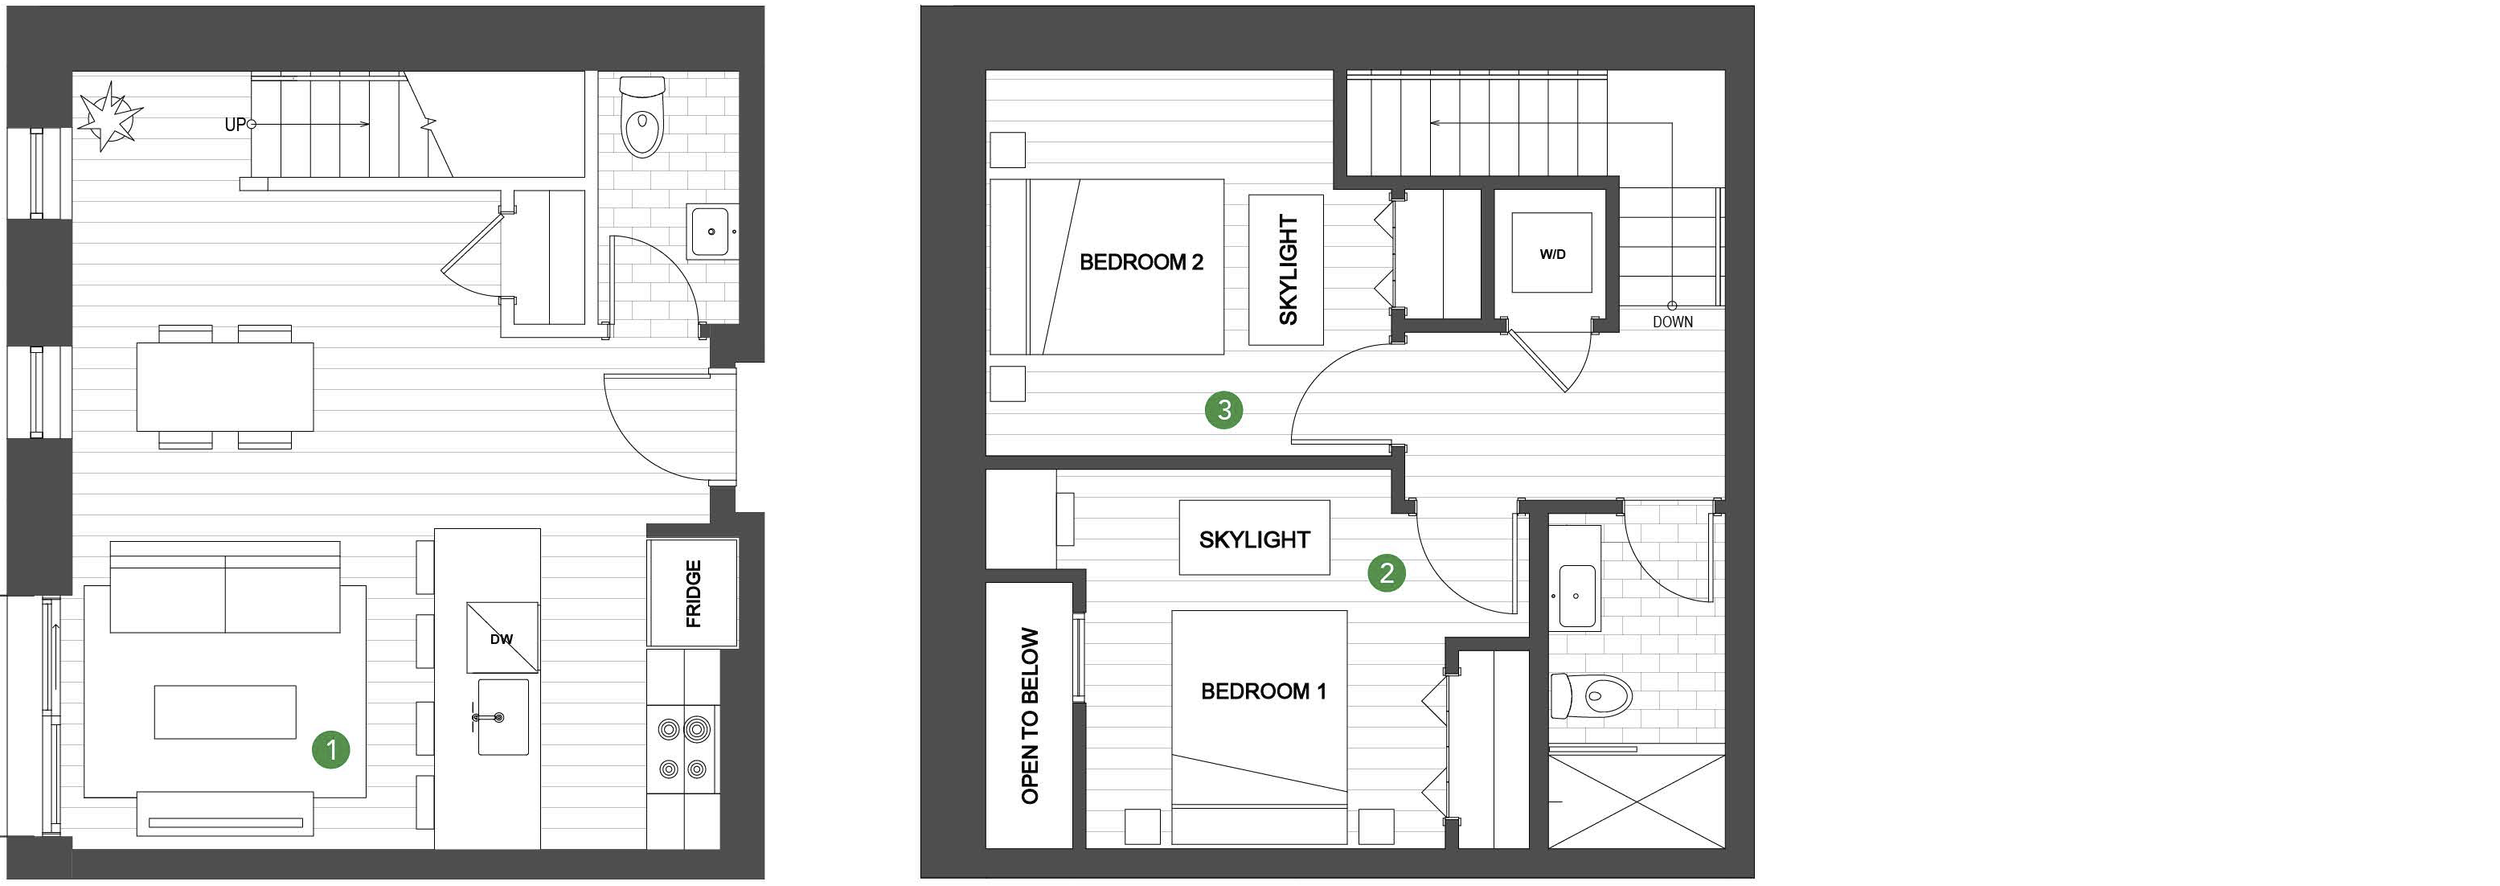   UNIT 02  2 BEDROOM / 1.5 BATH DUPLEX +OFFICE NICHE 1078 SQUARE FEET   REQUEST INFORMATION / APPLY FOR THIS UNIT   